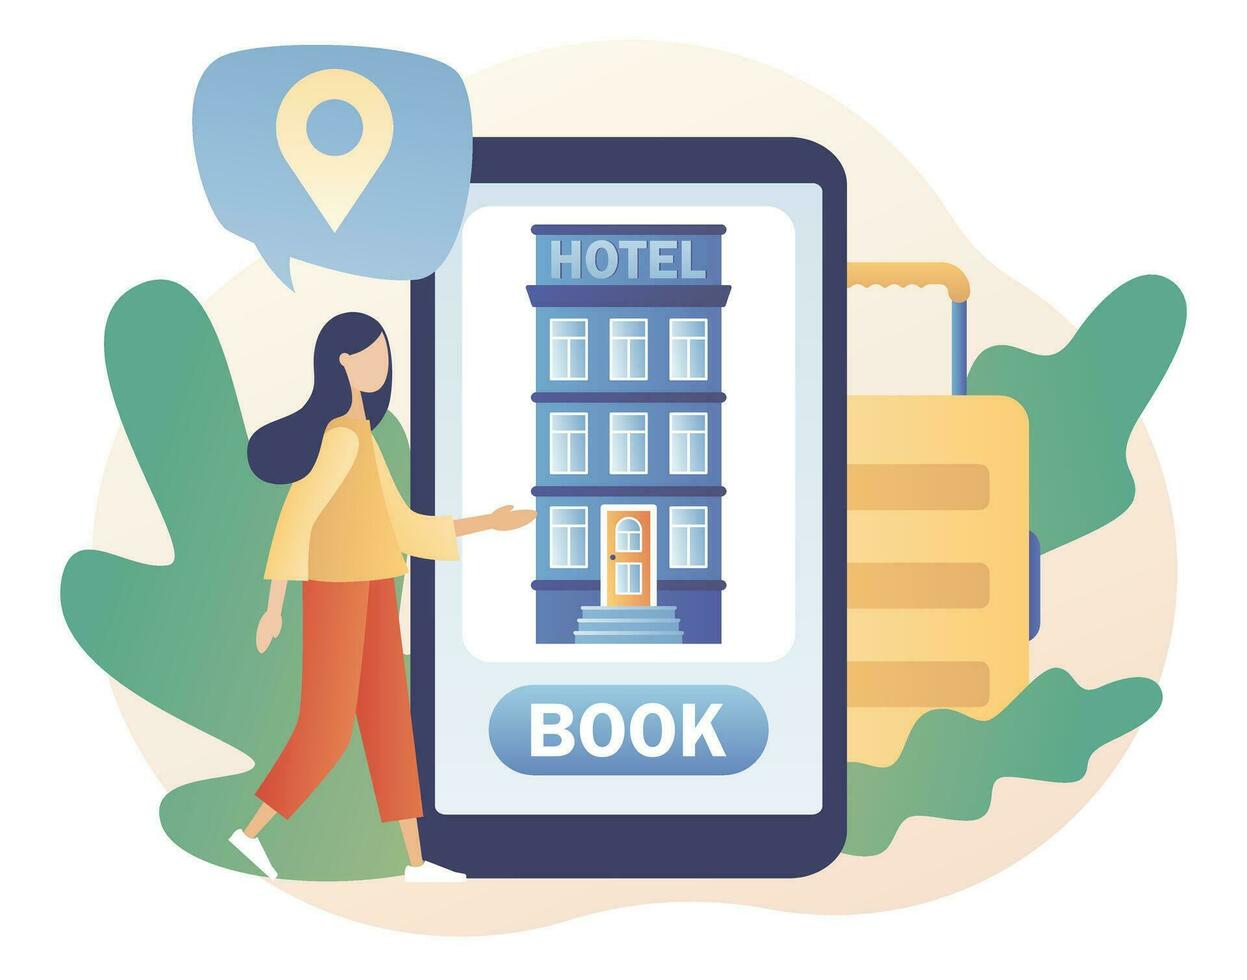 Tiny woman search, choose and reservation hotel or apartment in smartphone app. Booking hotel online. Tourist and business trip. Modern flat cartoon style. Vector illustration on white background